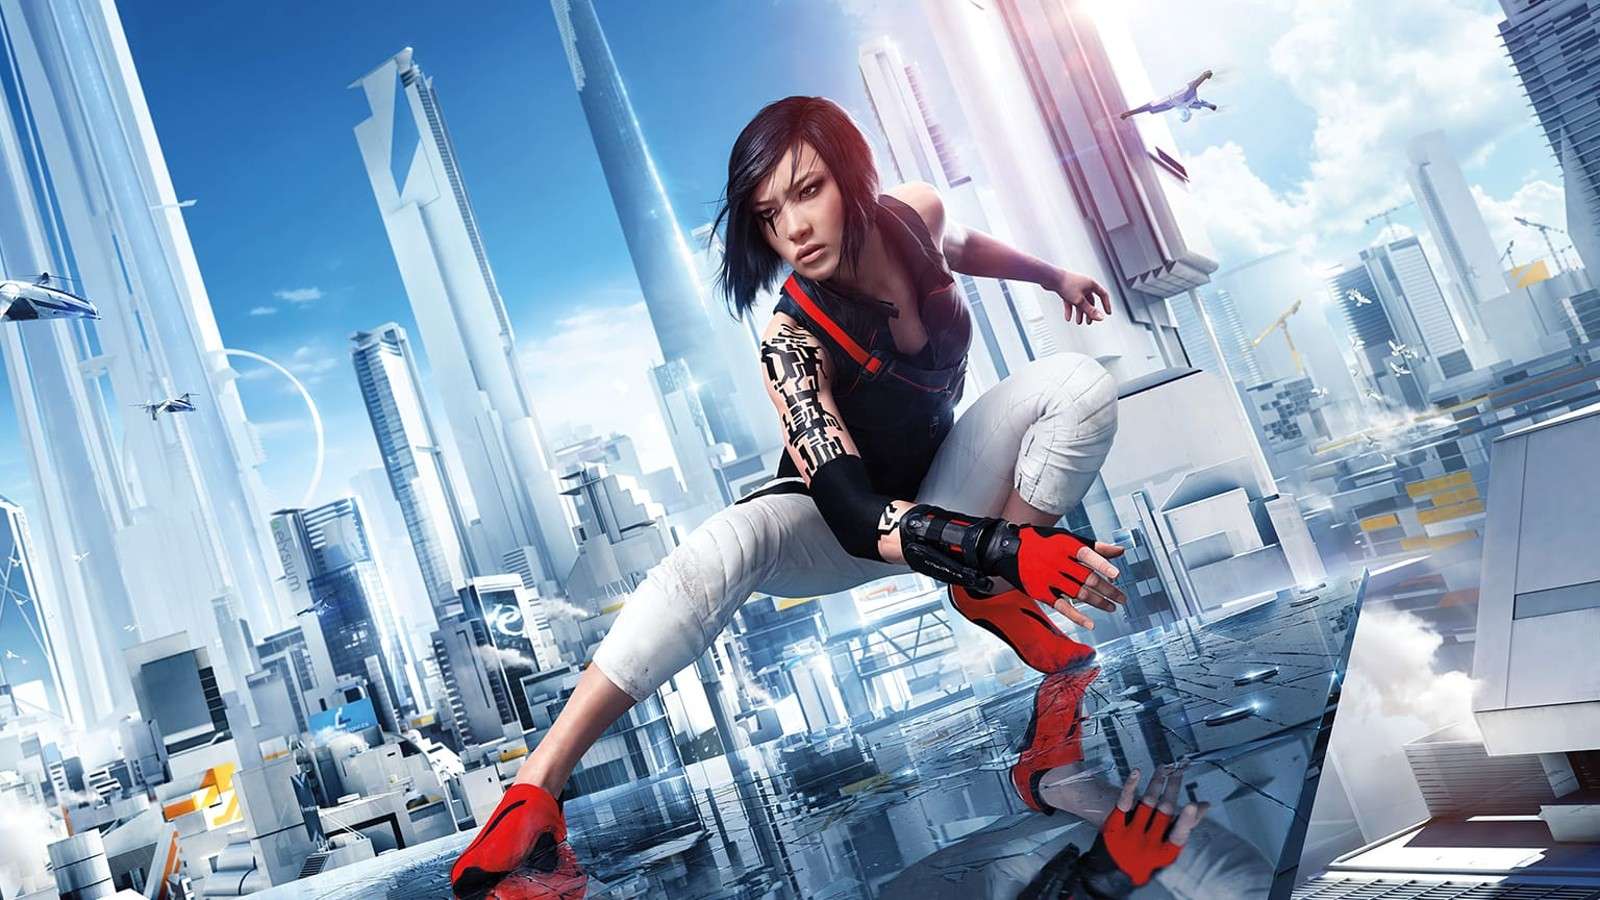 Mirrors Edge first released in 2008.